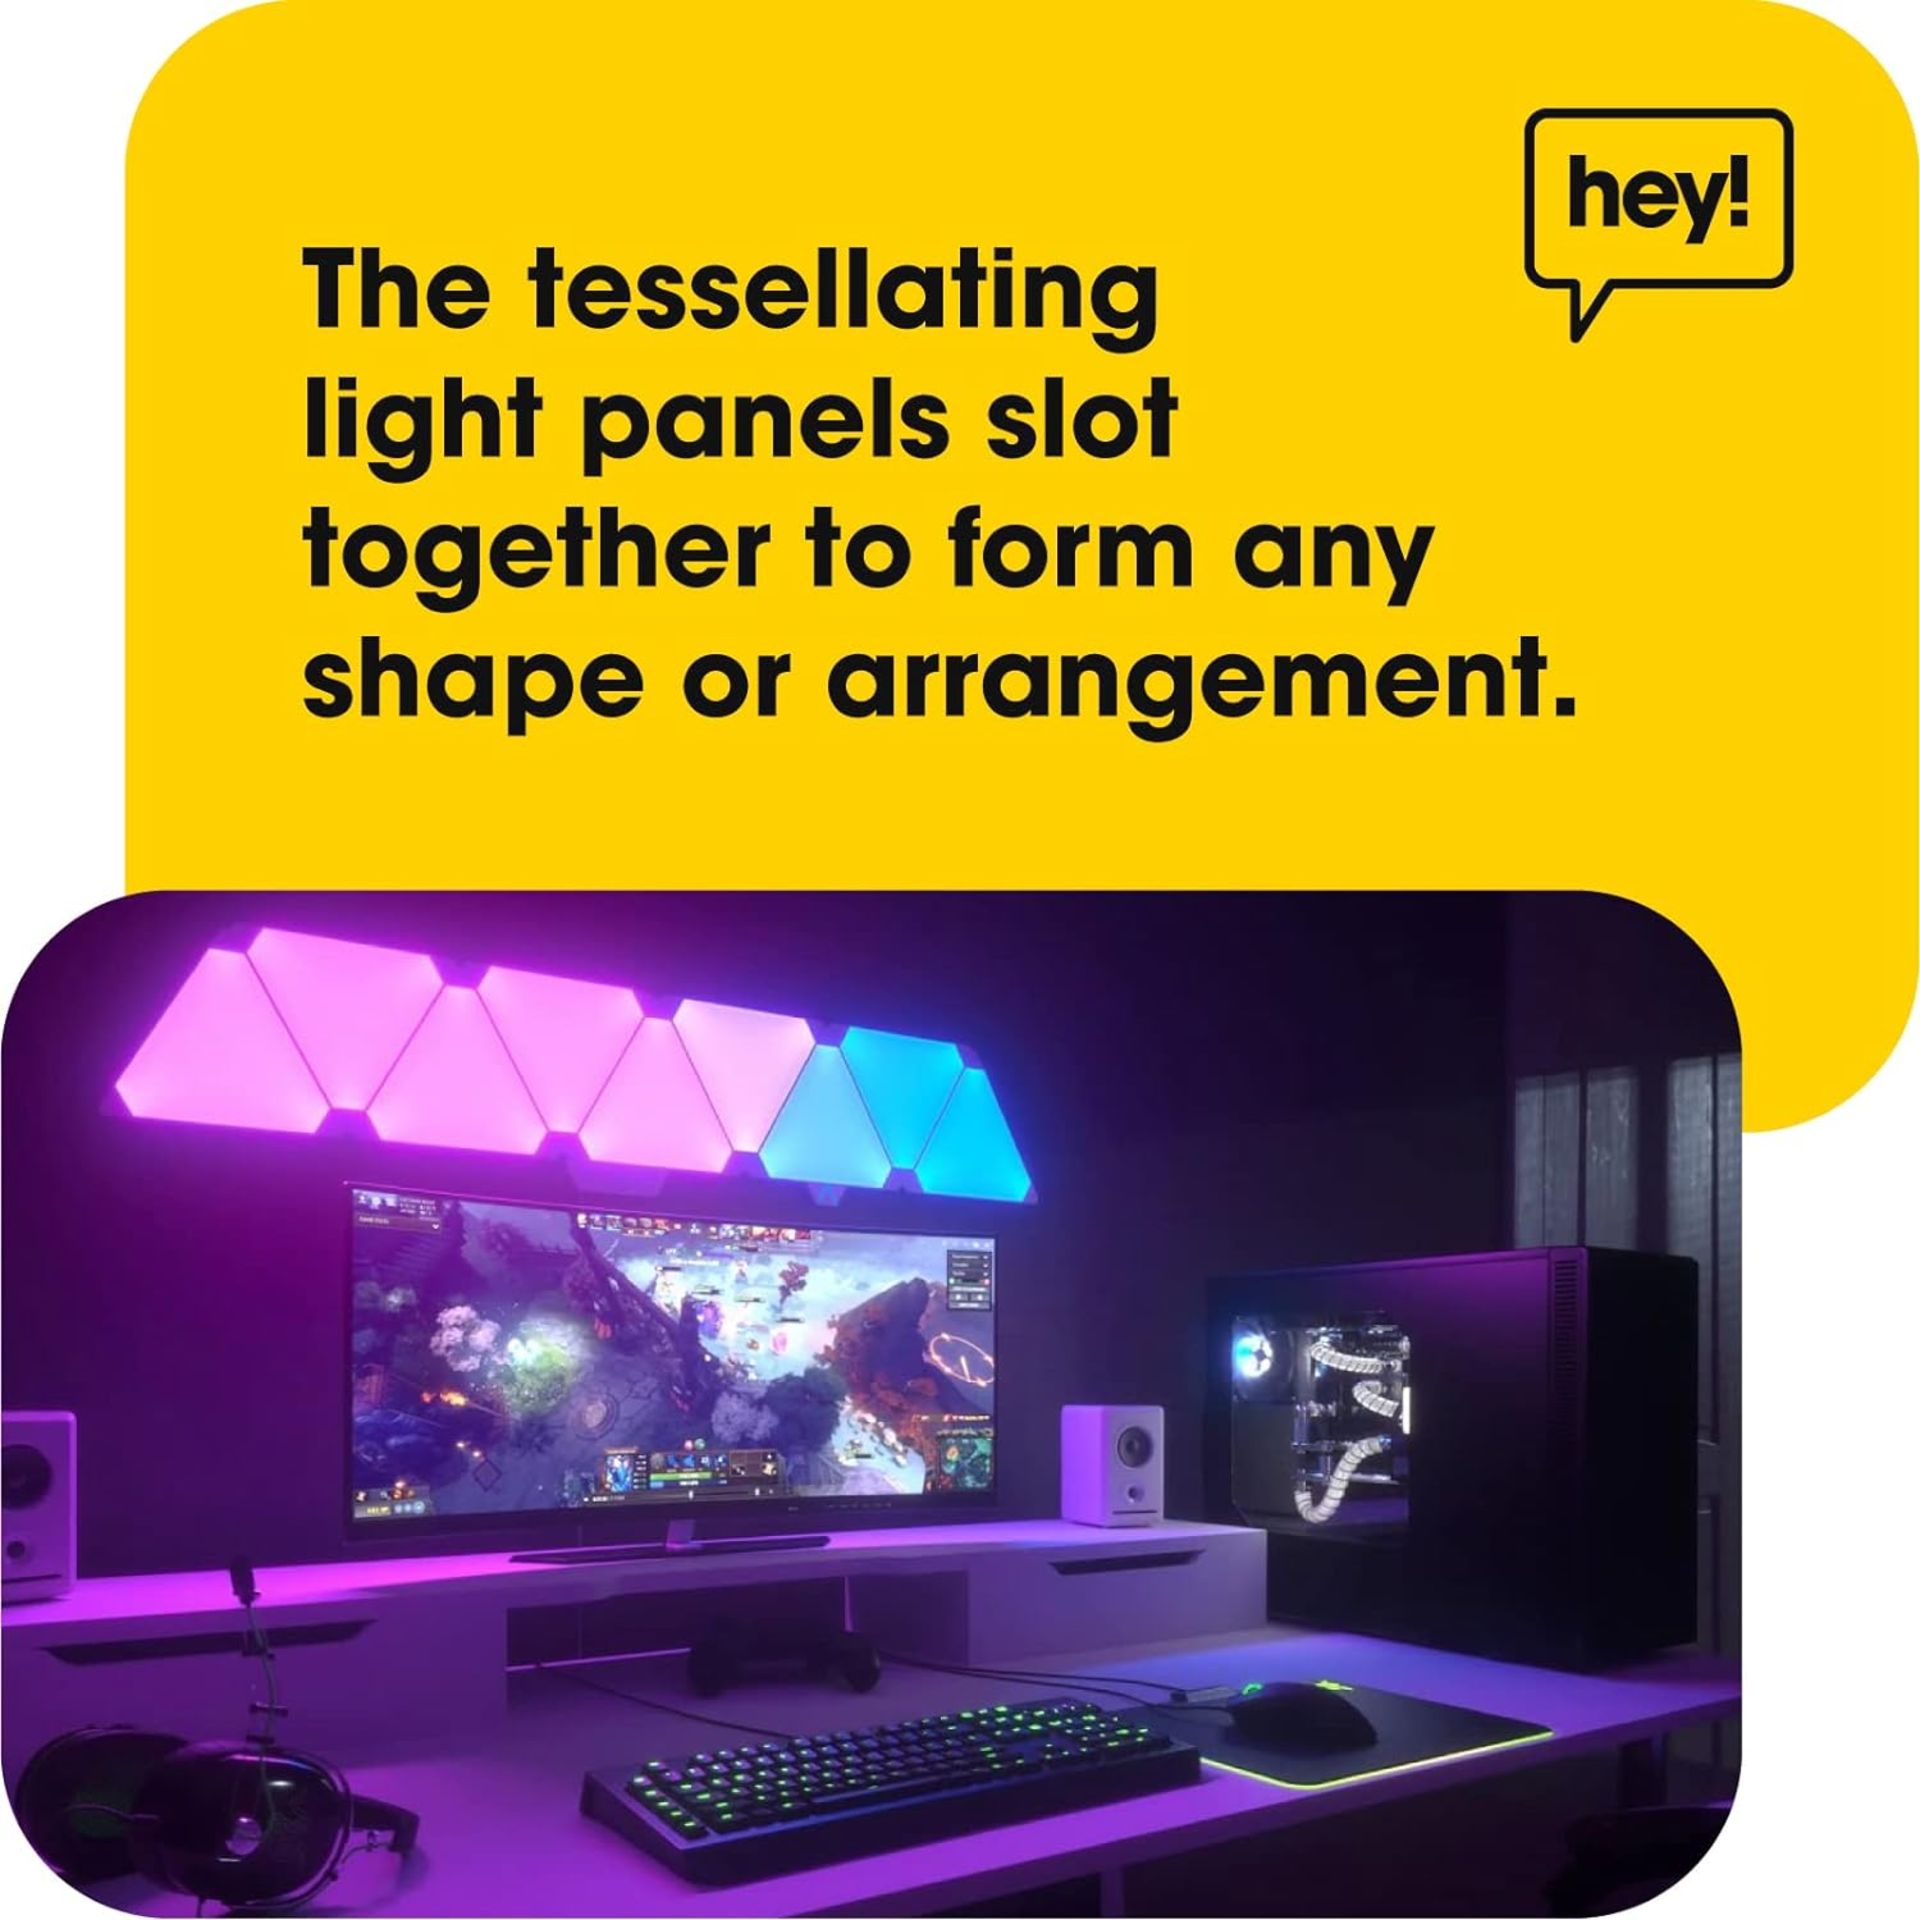 TRADE LOT TO CONTAIN 10x NEW & BOXED HEY! SMART LED RGBW Panel Lighting Kit. RRP £119.99 EACH. - Image 5 of 6